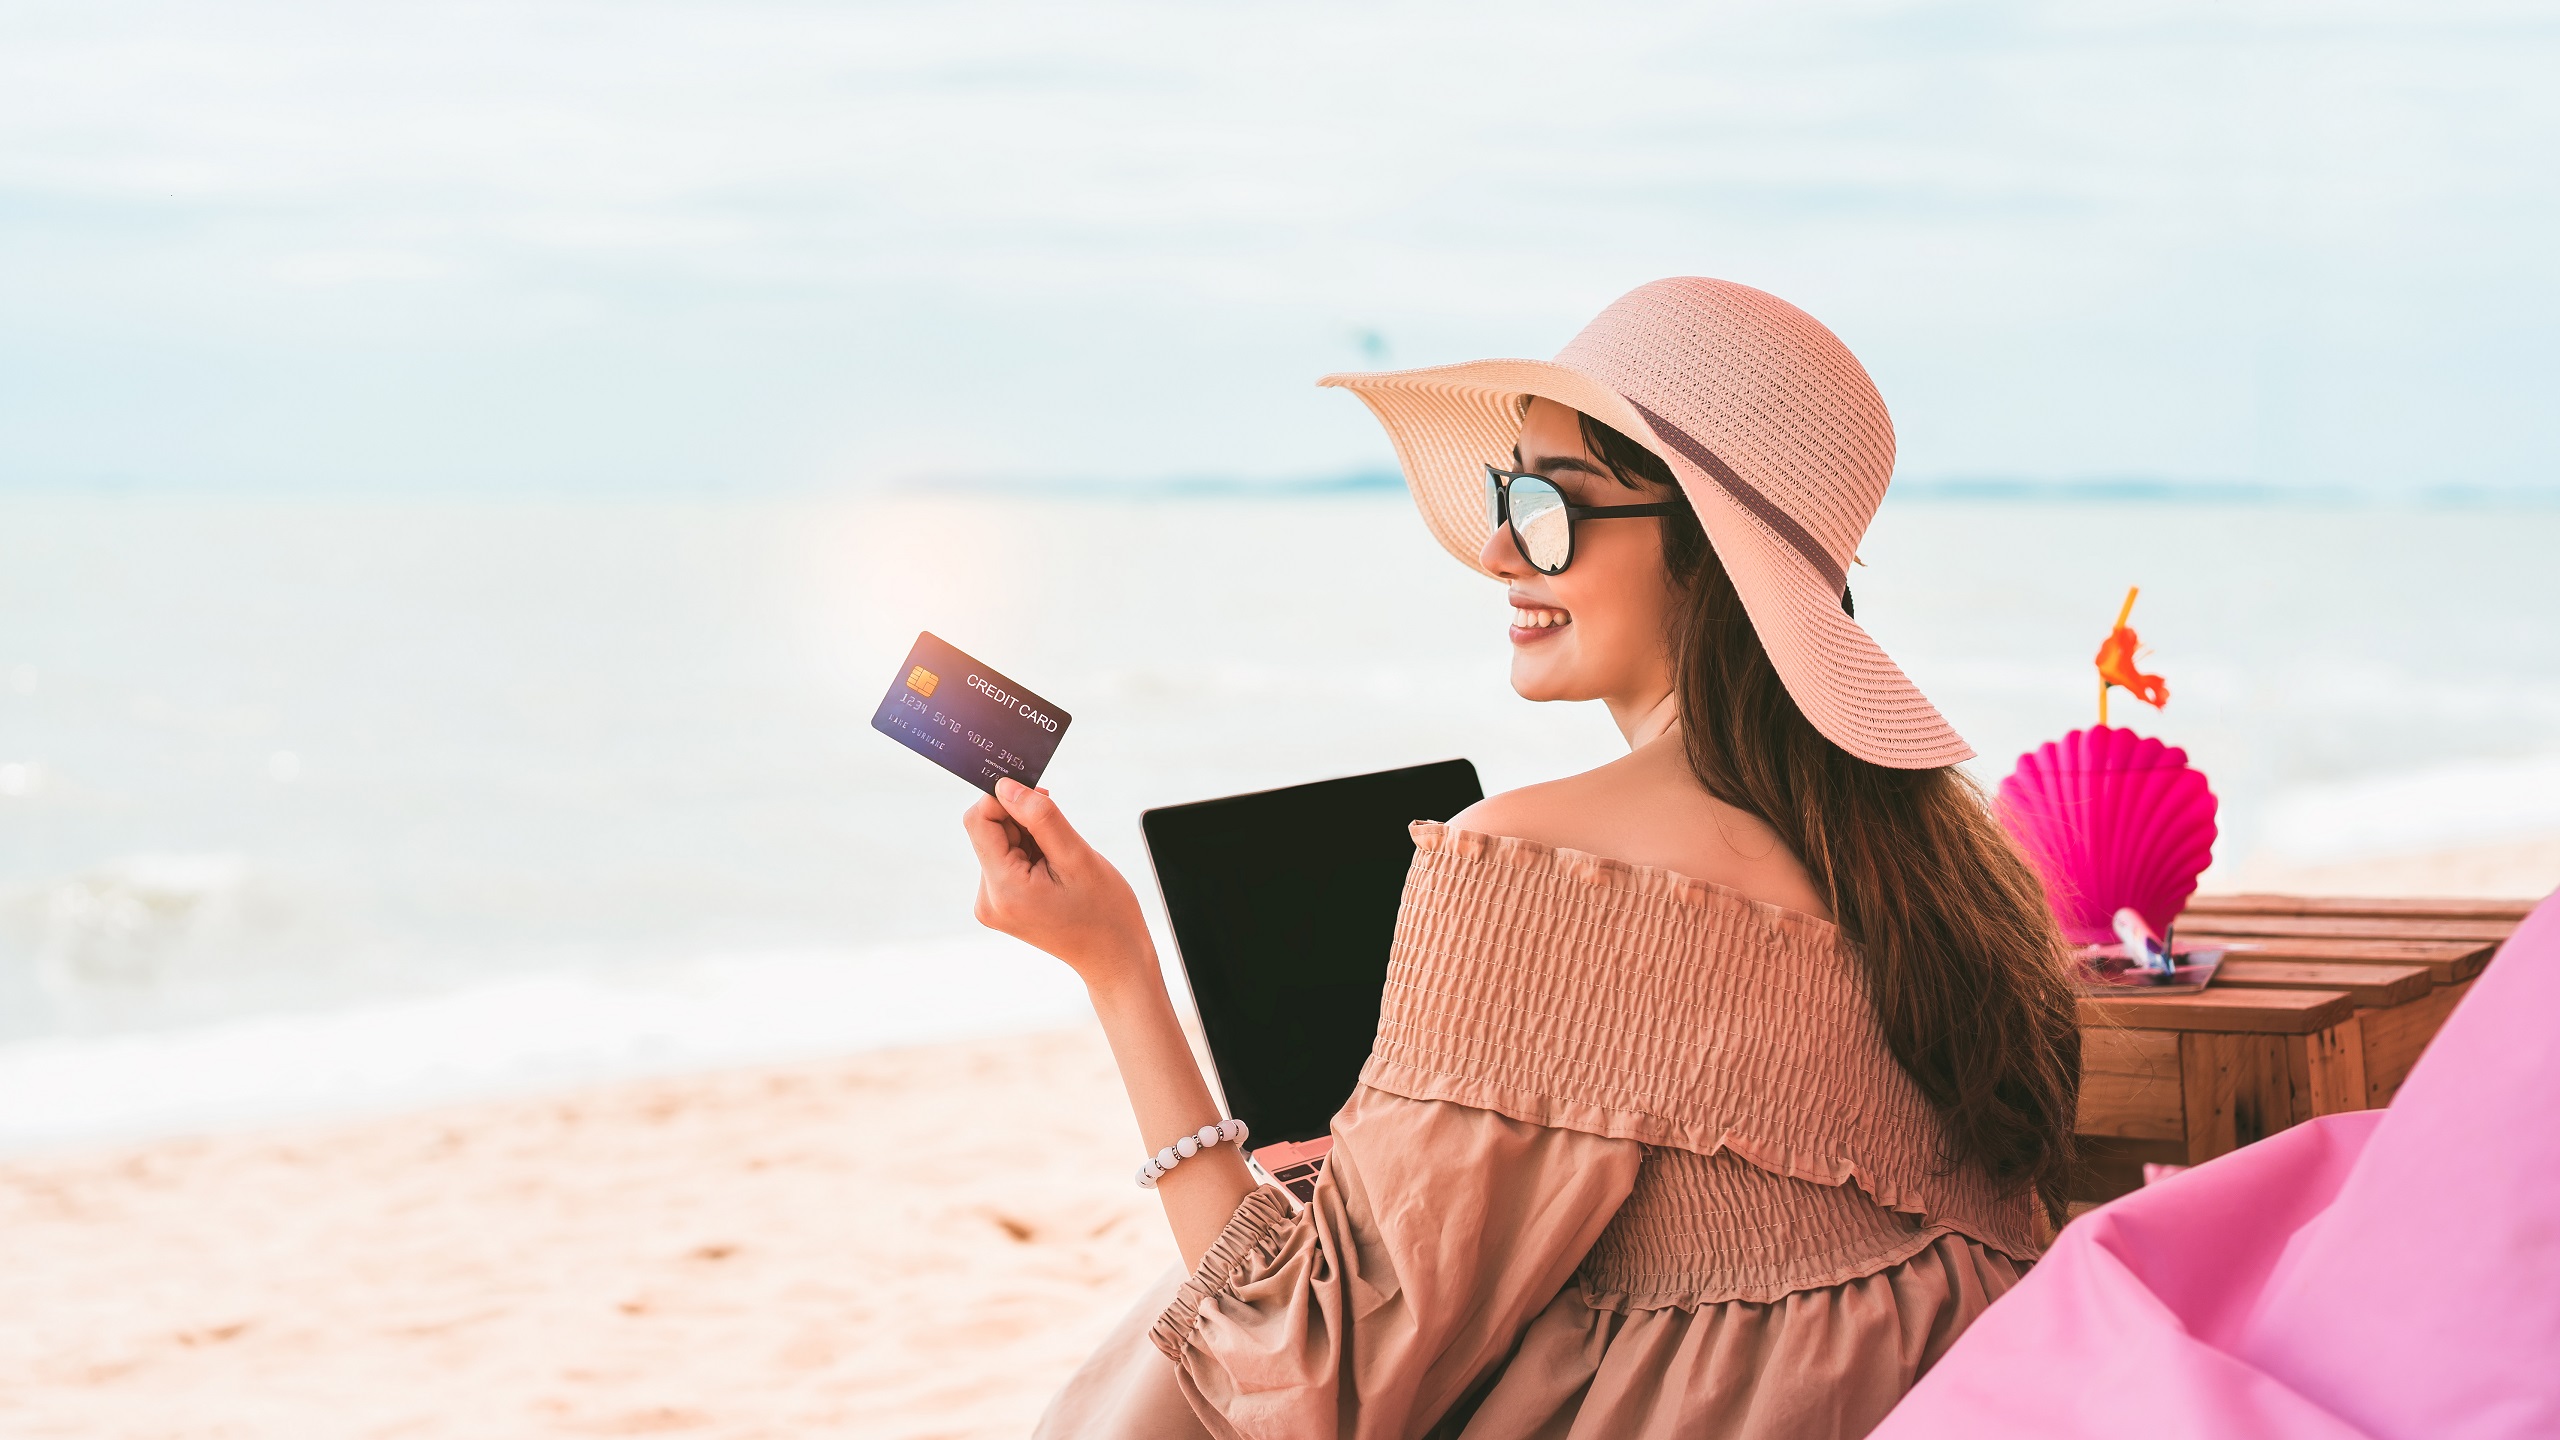 Best Travel Credit Card in India